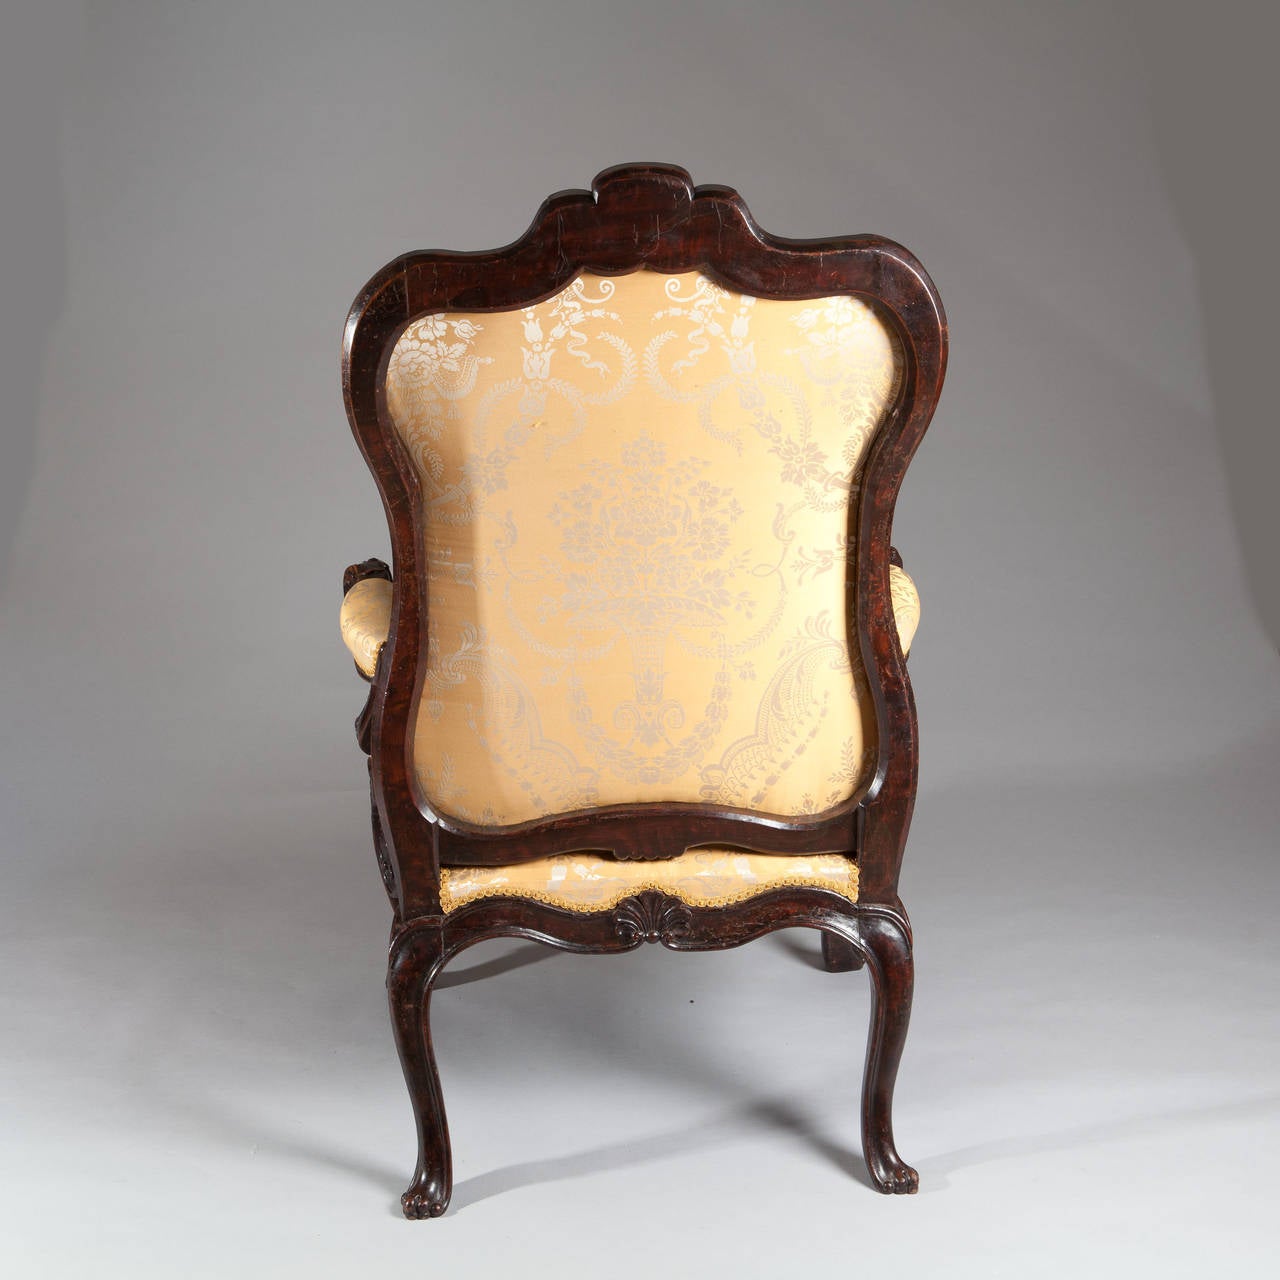 Dutch 18th Century Large-Scale Continental Armchair